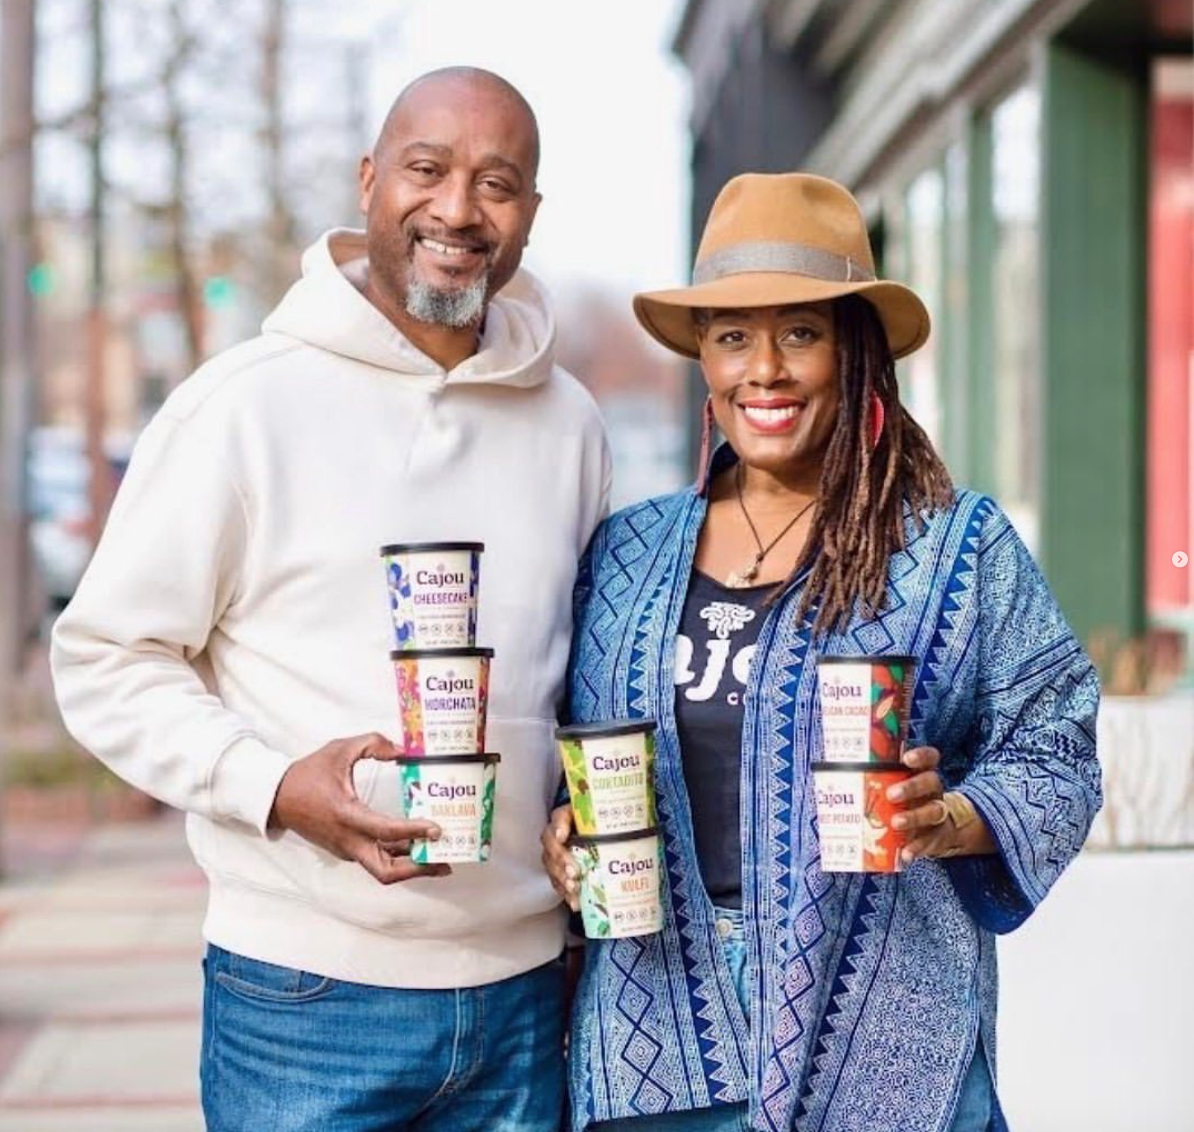 Husband-wife team find success with Black-owned plant-based ice cream brand